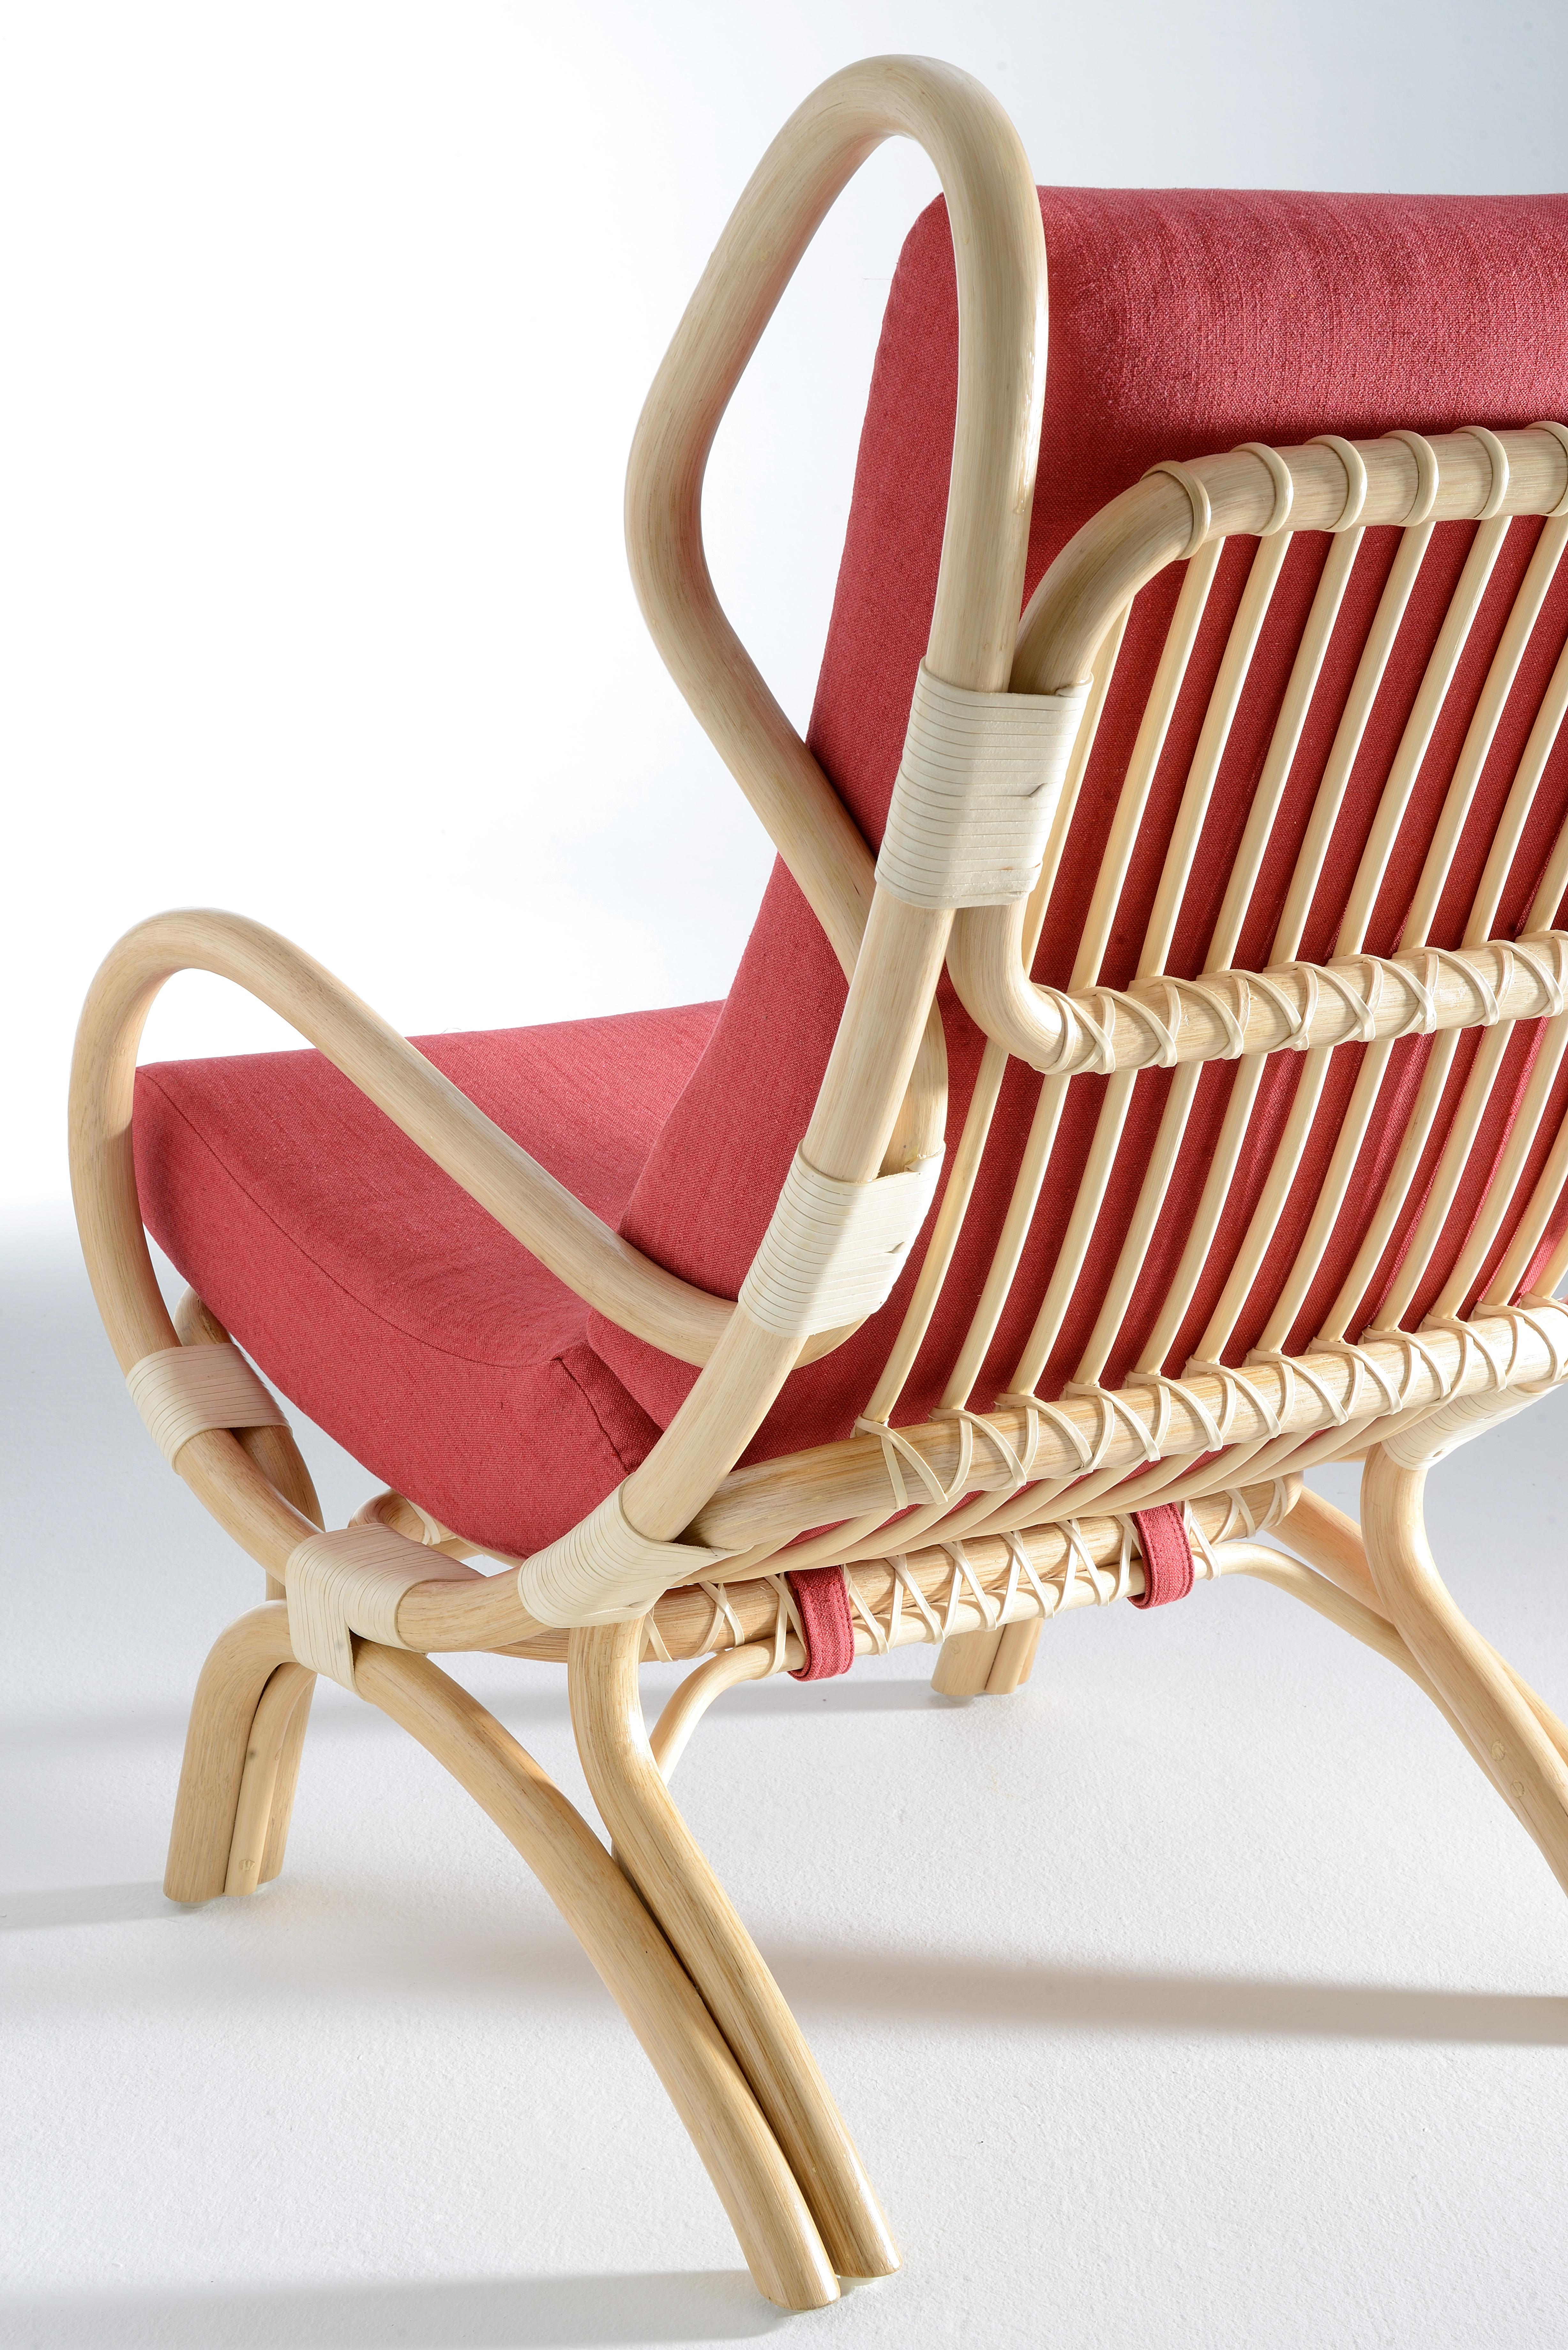 Design by Gio Ponti for Bonacina 1889, 1963.
Gio Ponti with a single sign, a continuous line, gives the idea of continuity and plasticity. Inspired by traditional seats, it includes headrest and armrests for maximum seating comfort.
Rattan and